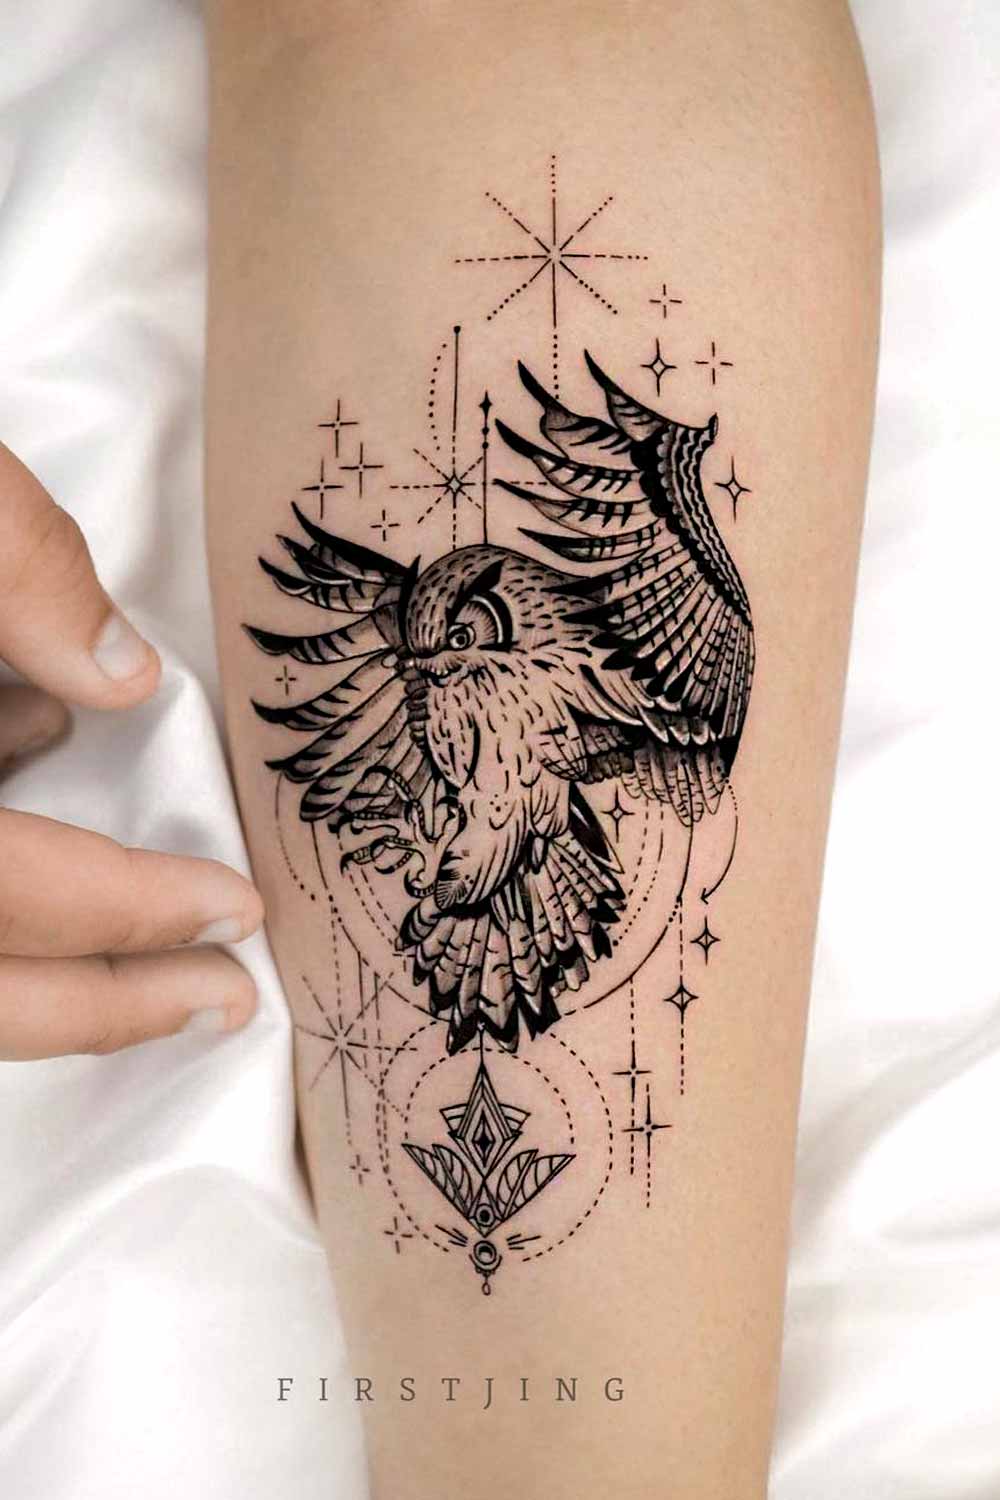 Tiny Design 30 Classy First Tattoo Ideas for Women Over 40  Page 11